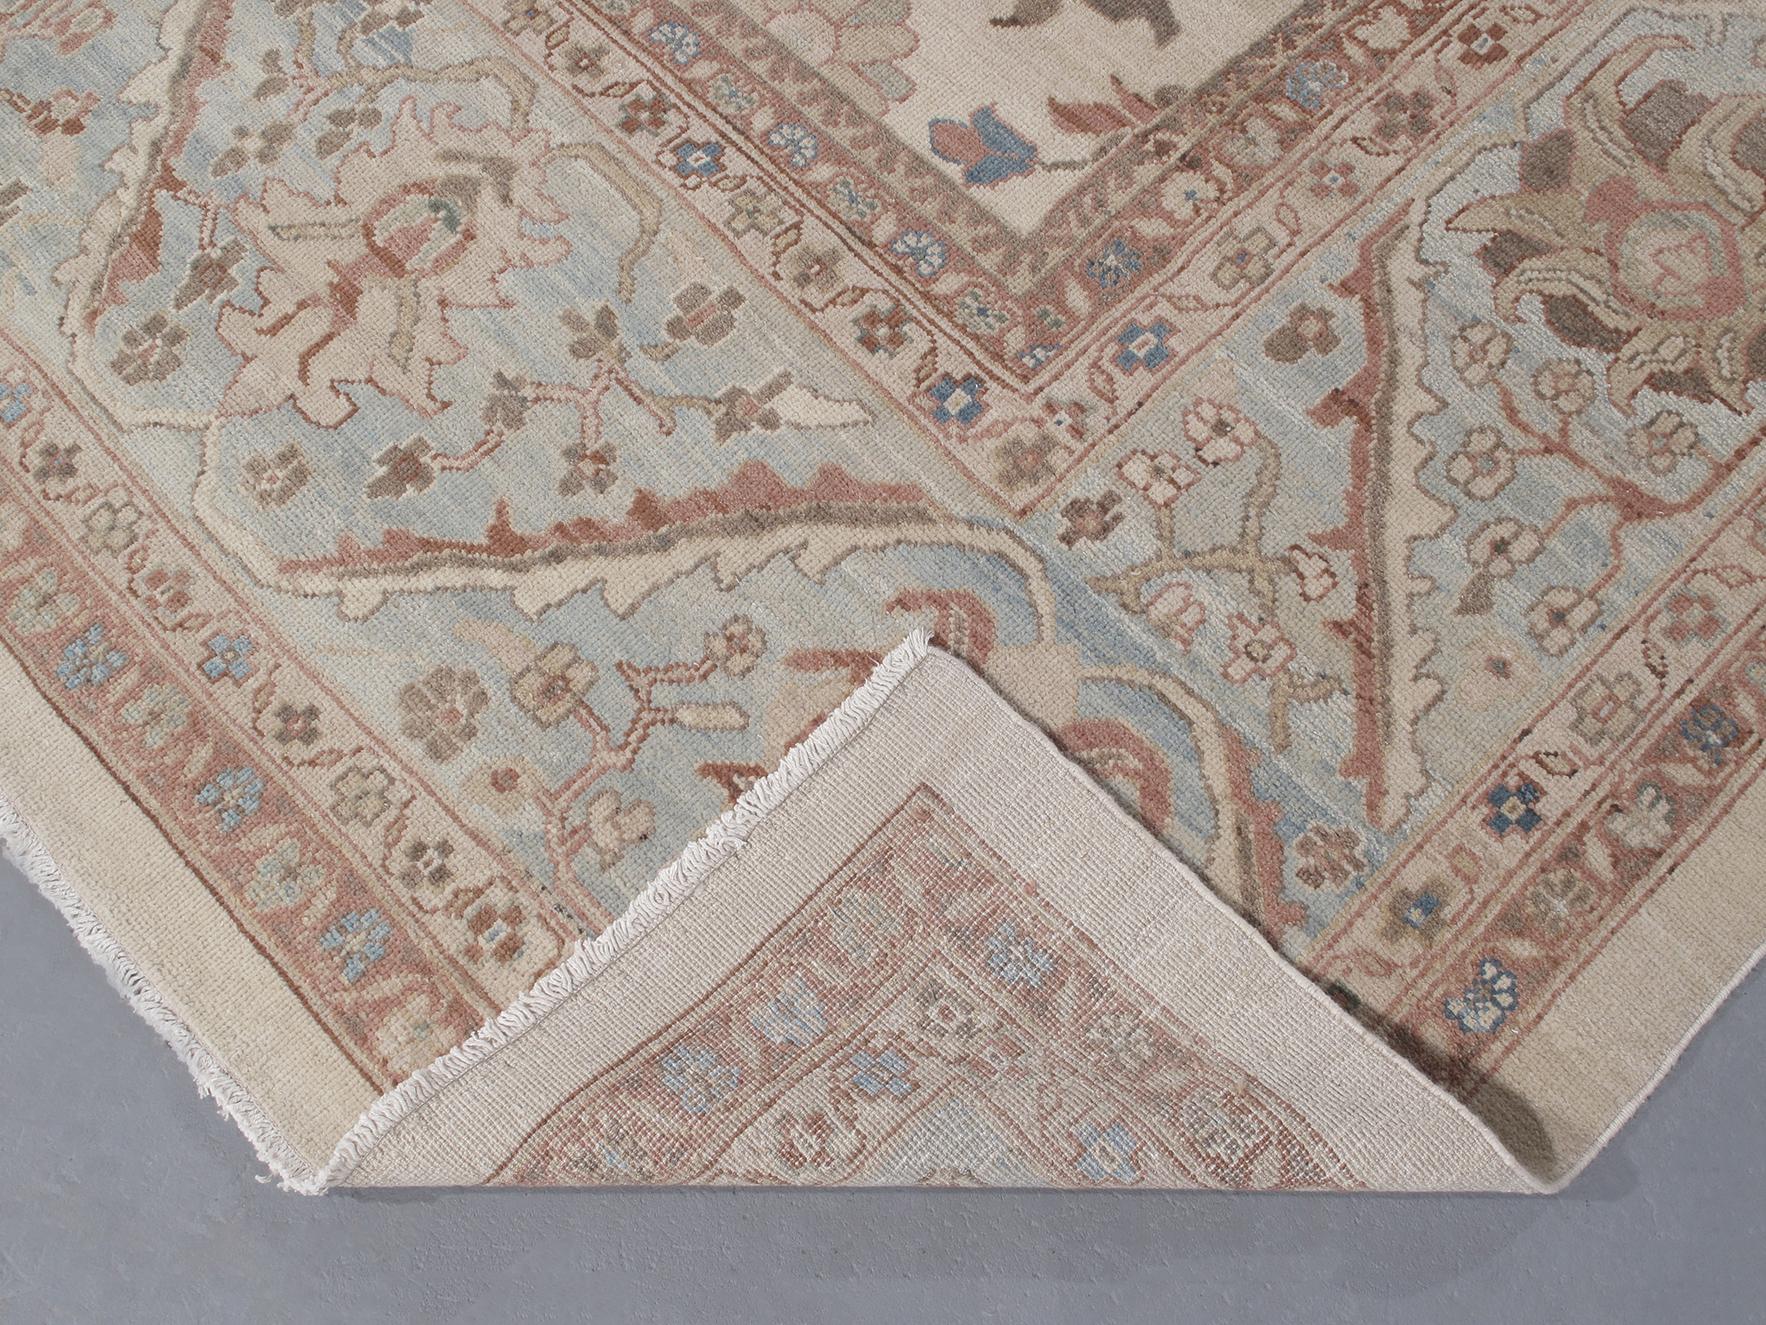 Original Persian Ziegler Sultanabad Rug in Pale Blue, Beige, and Rust Colors In New Condition For Sale In New York, NY